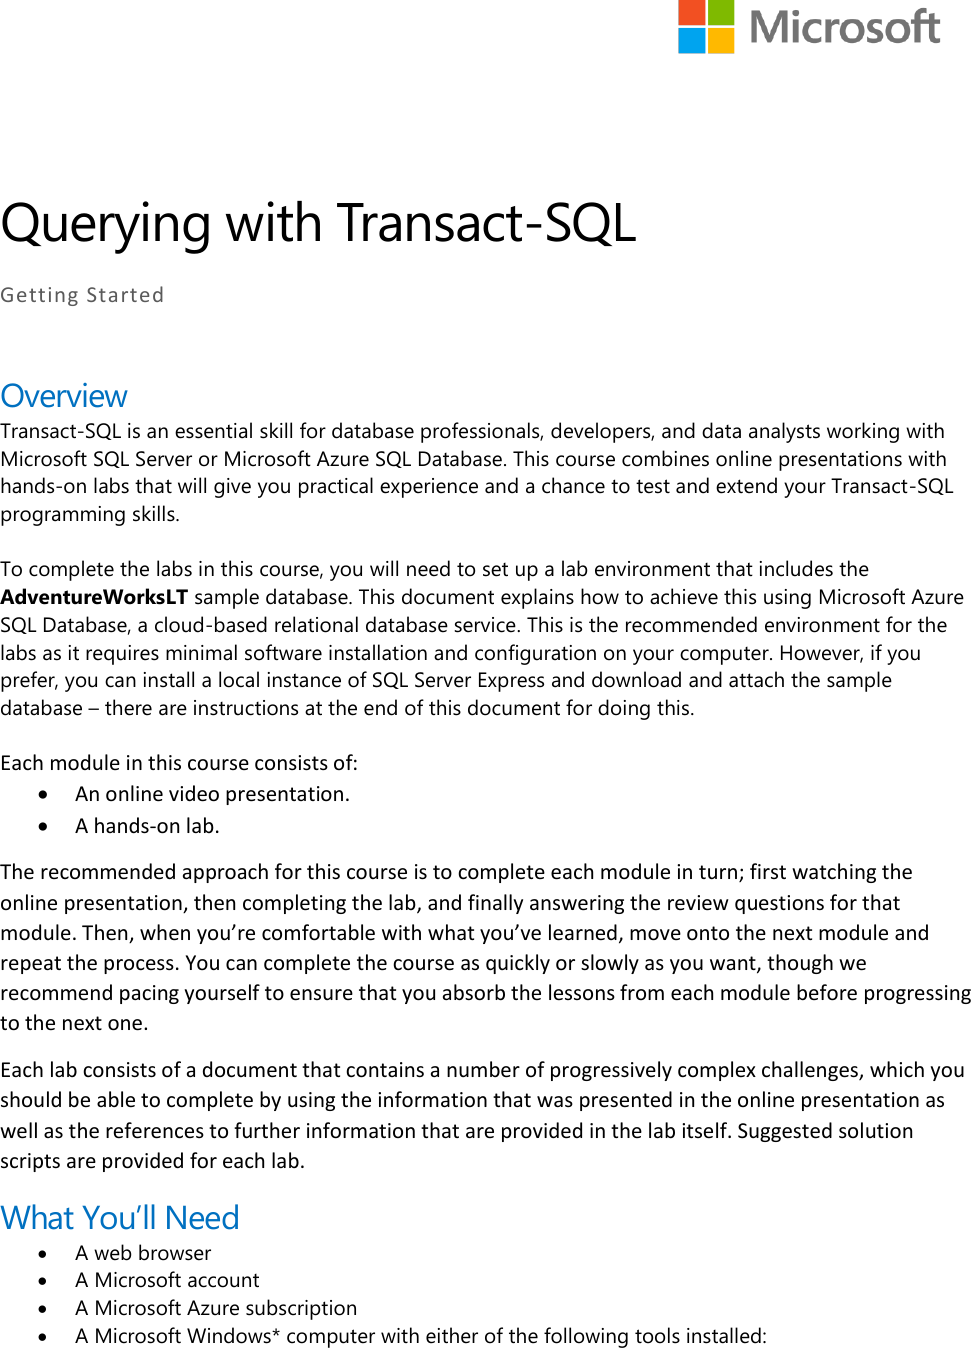 Page 1 of 11 - Getting Started With Transact-SQL Labs MVA Setup Guide